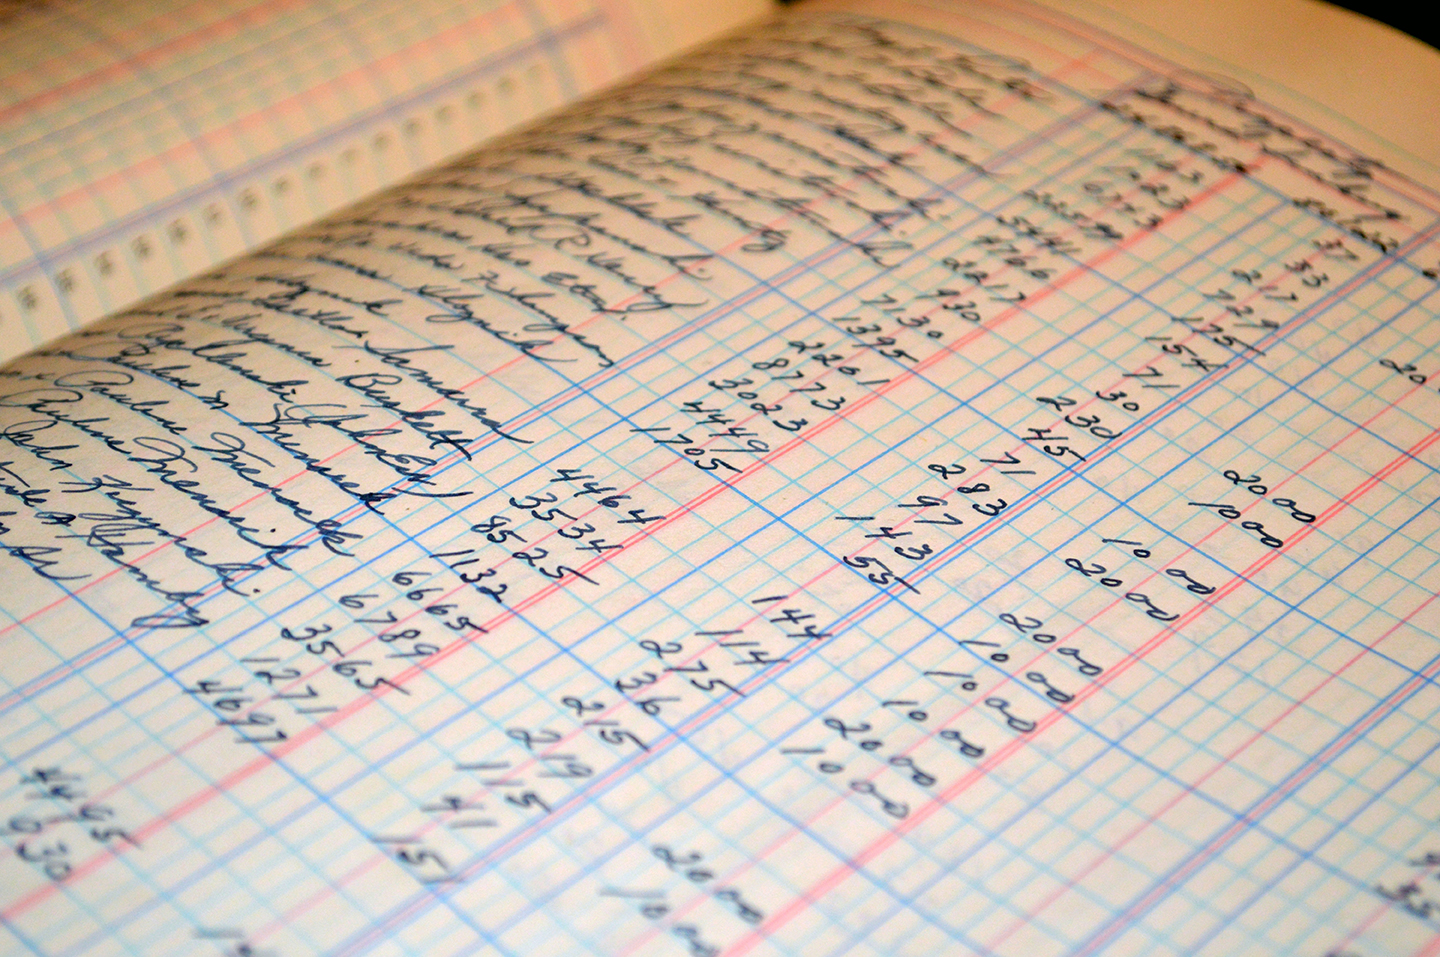 photo of a hand-written spreadsheet on a sheet of paper in a notebook